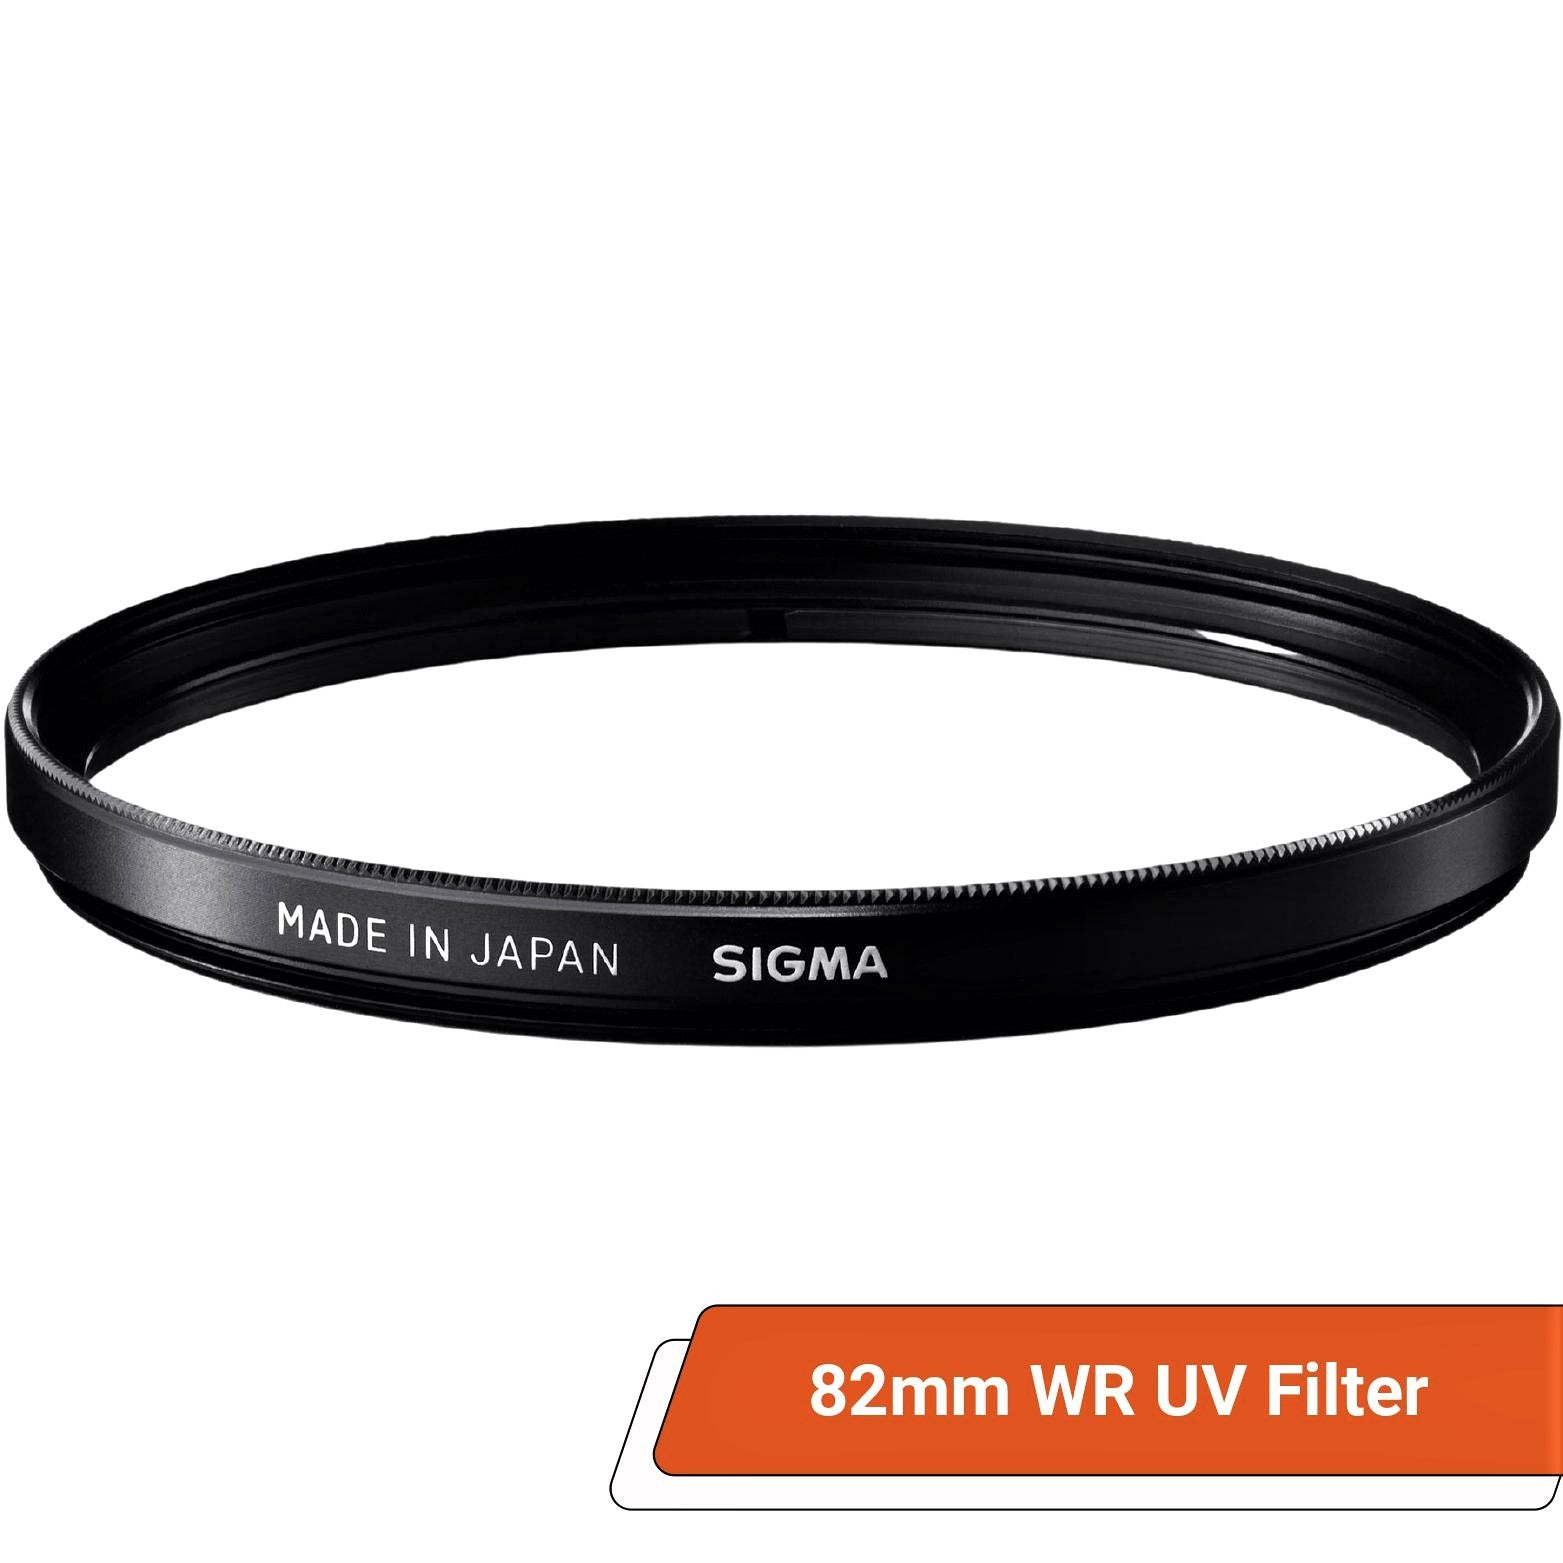 Sigma 82mm WR (Water Repellent) UV Filter